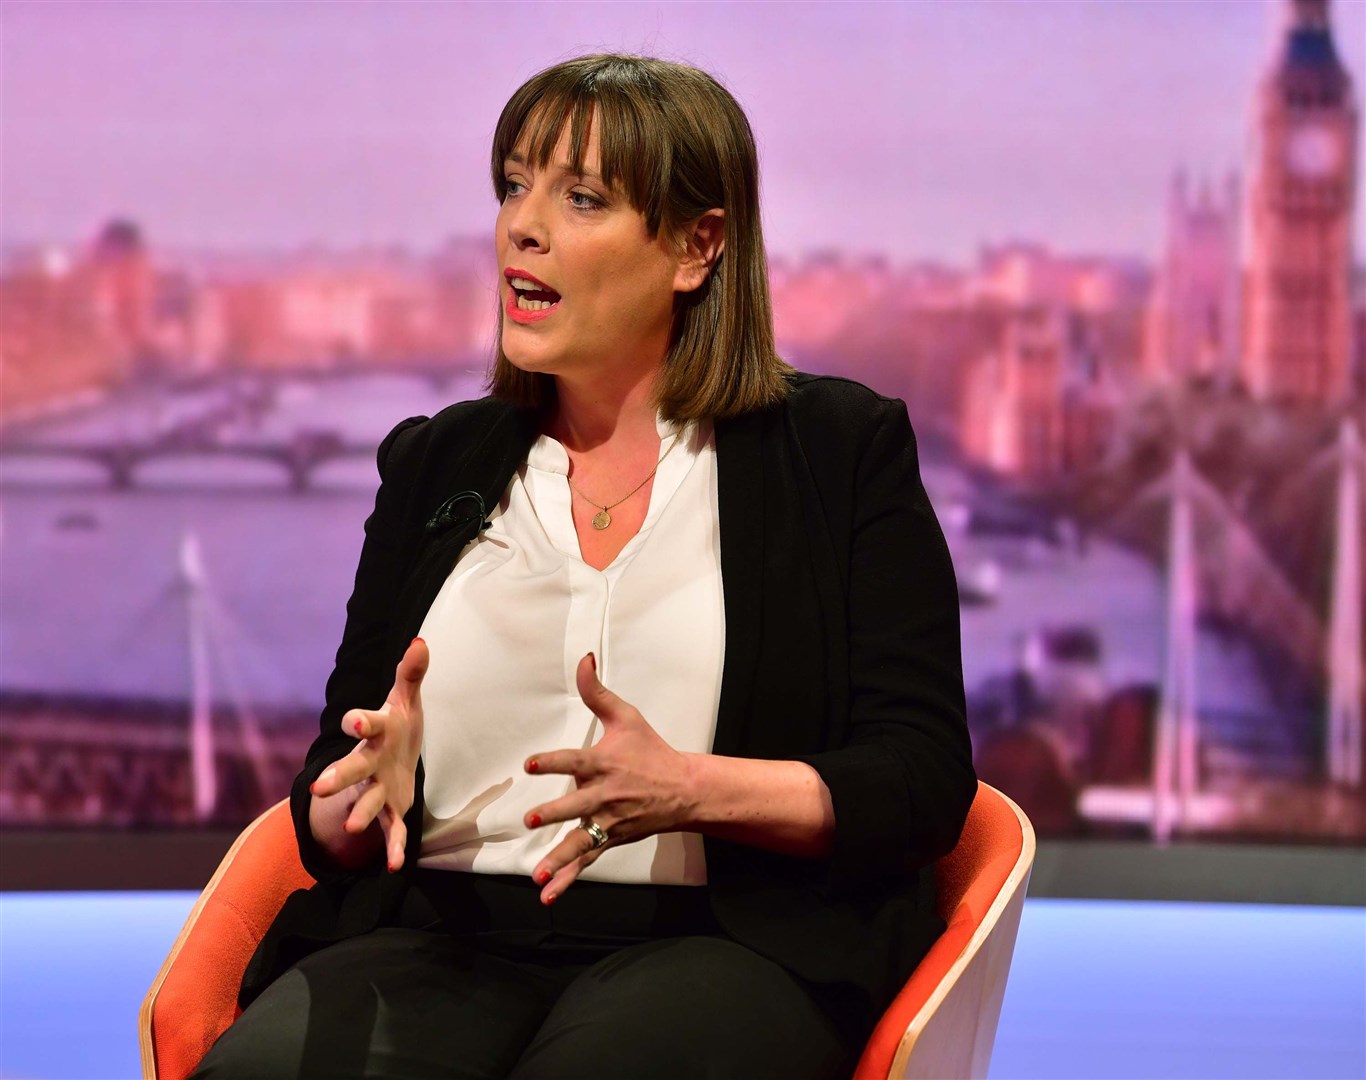 Labour MP Jess Phillips said ‘thousands of people are suffering’ from limits on freedom of speech due to the use of NDAs (BBC/PA)